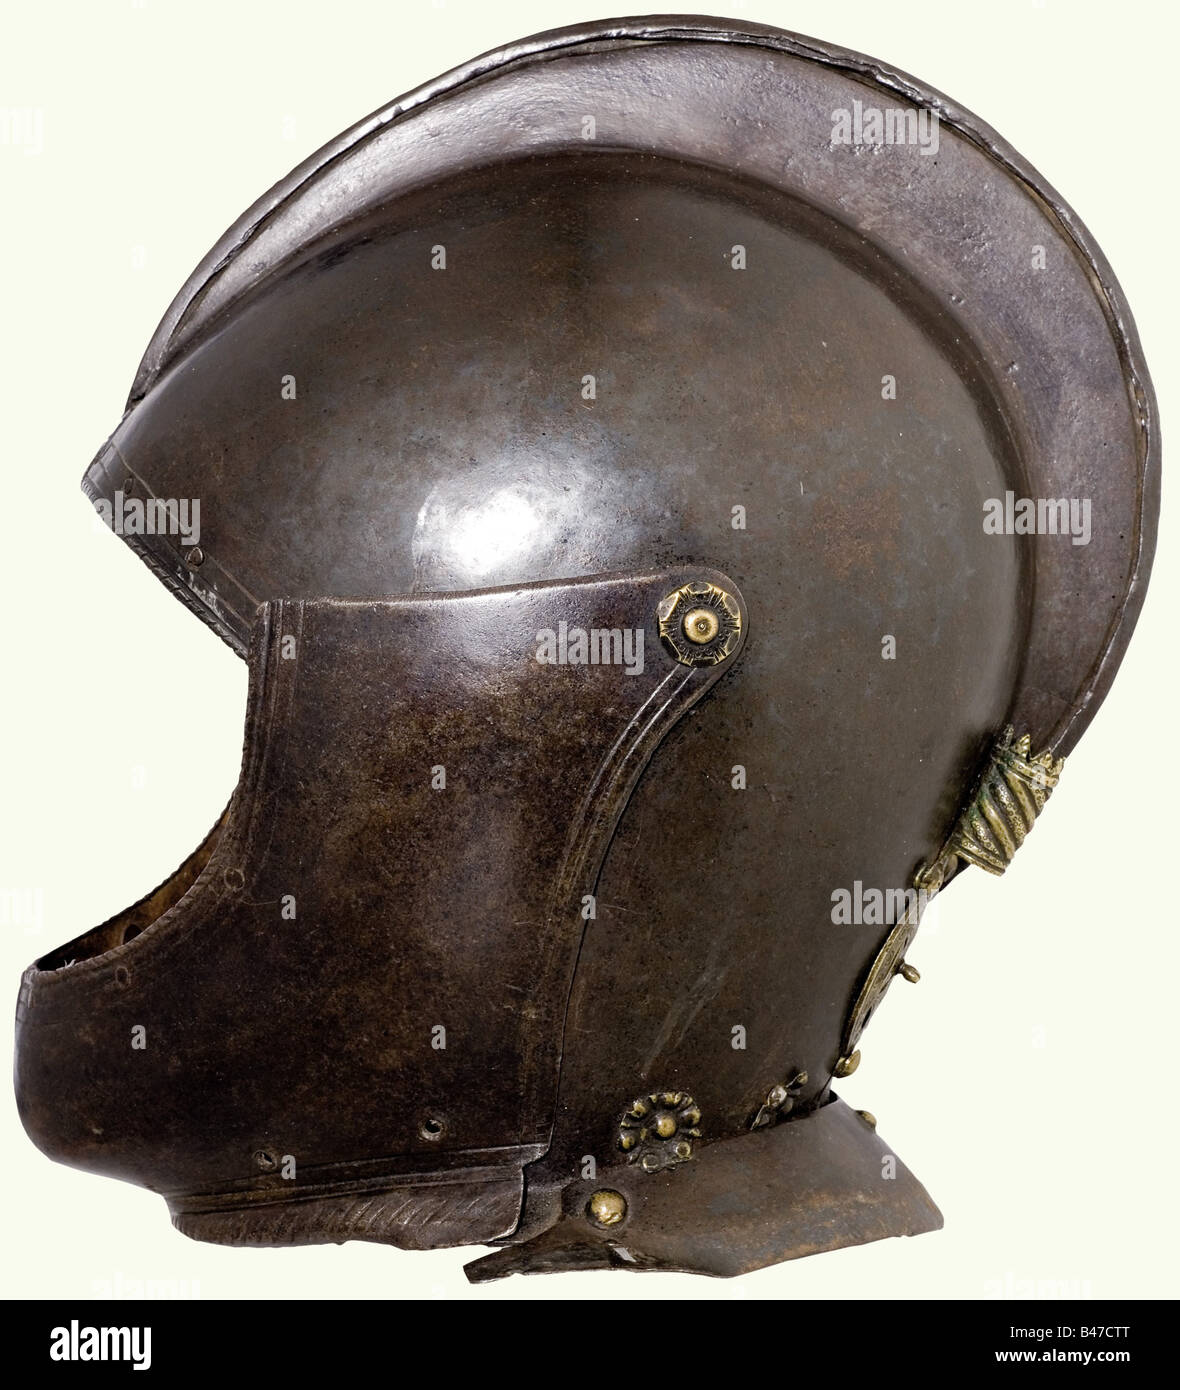 An Italian heavy burgonet, circa 1620. Two-piece, blackened heavy skull with a turned under comb and a face opening with a corded edge. Cut brass plume socket riveted on the back. Movable bevor with side-mounted hook latch. Riveted (incomplete) neck protector. Skull has (later?) linen lining. Height 28 cm. historic, historical, 17th century, weapons, arms, weapon, arm, fighting device, object, objects, stills, clipping, clippings, cut out, cut-out, cut-outs, utensil, piece of equipment, utensils, plating, armour-plating, armour, armor, reactive armour, armour s, Stock Photo